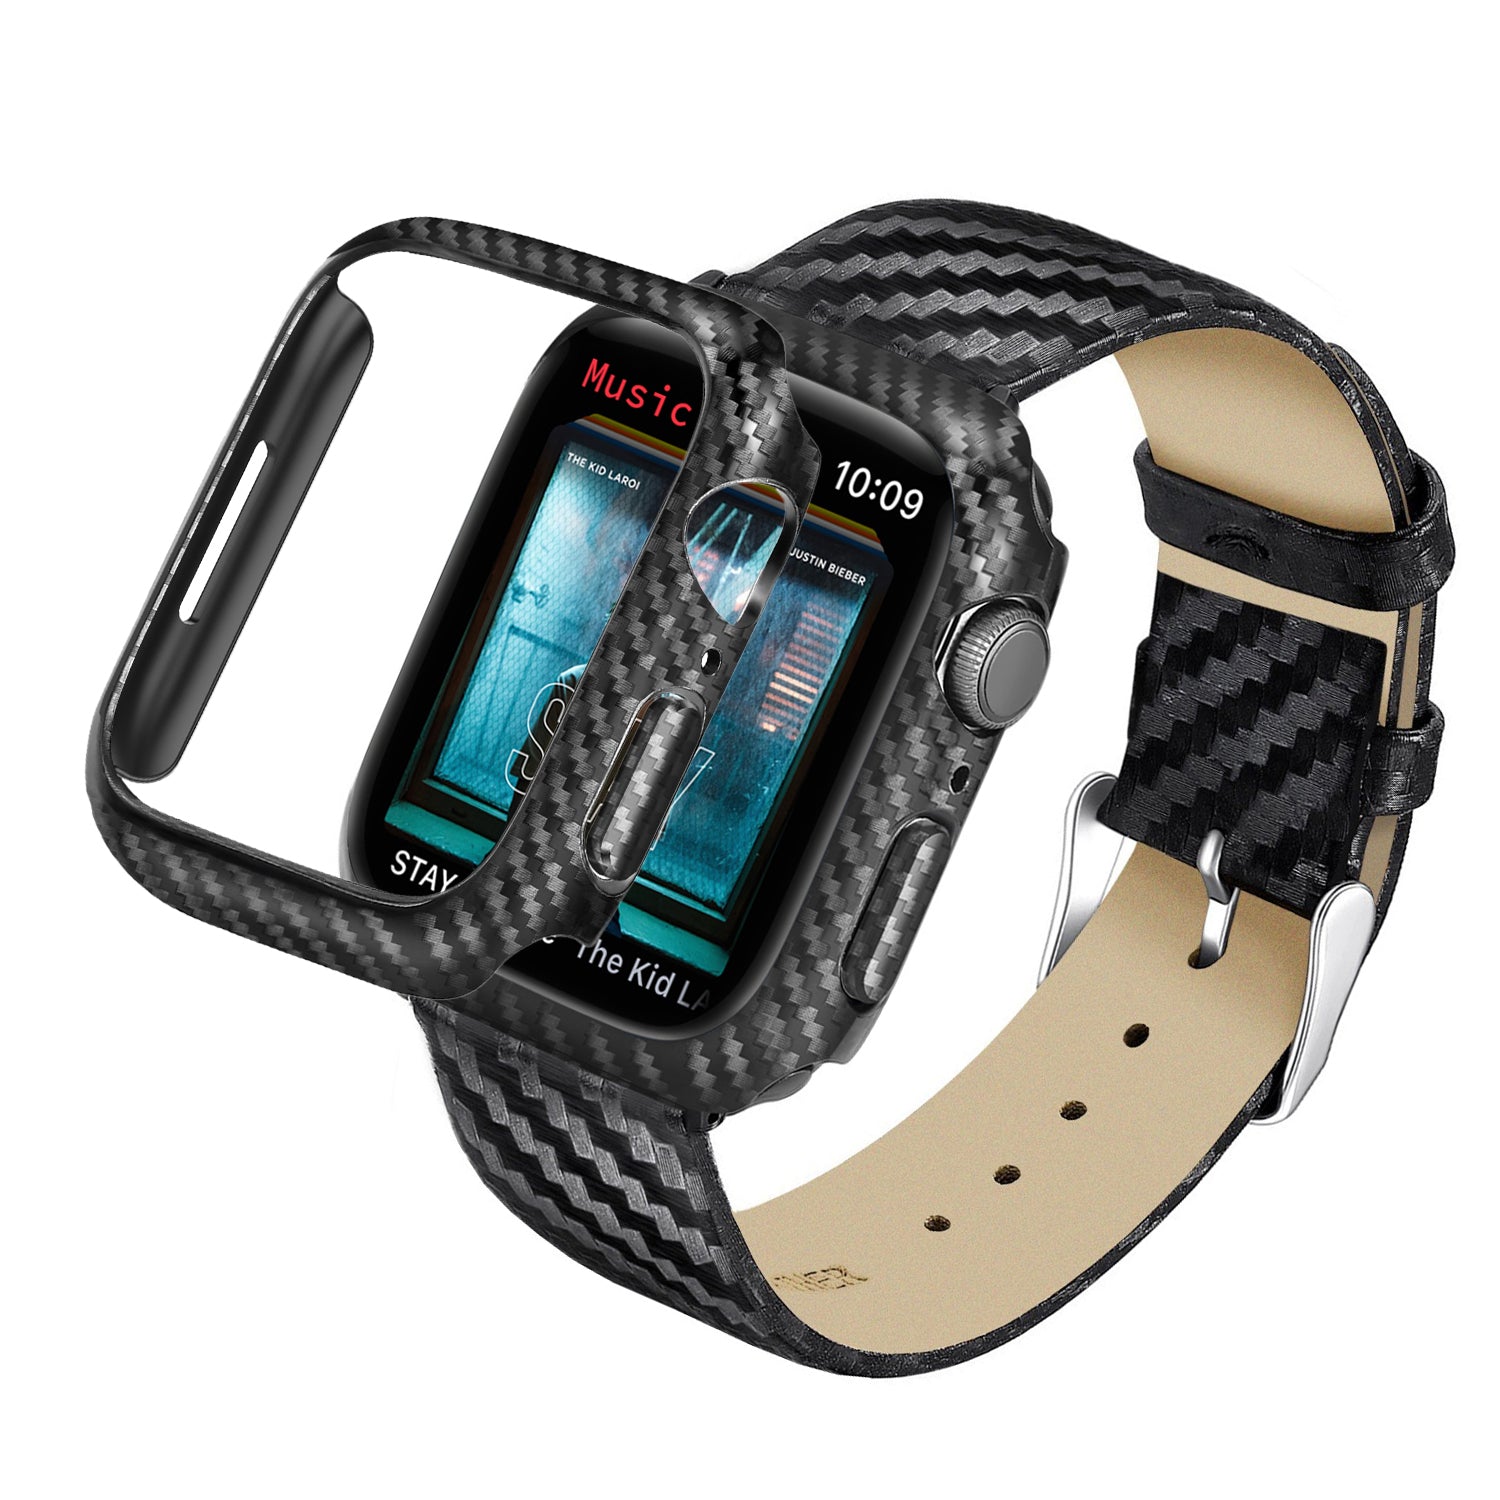 Carbon Fiber PC Watch Case Cover + Genuine Leather Adjustable Watchband for Apple Watch SE 40mm / Watch Series 4/5/6 40mm